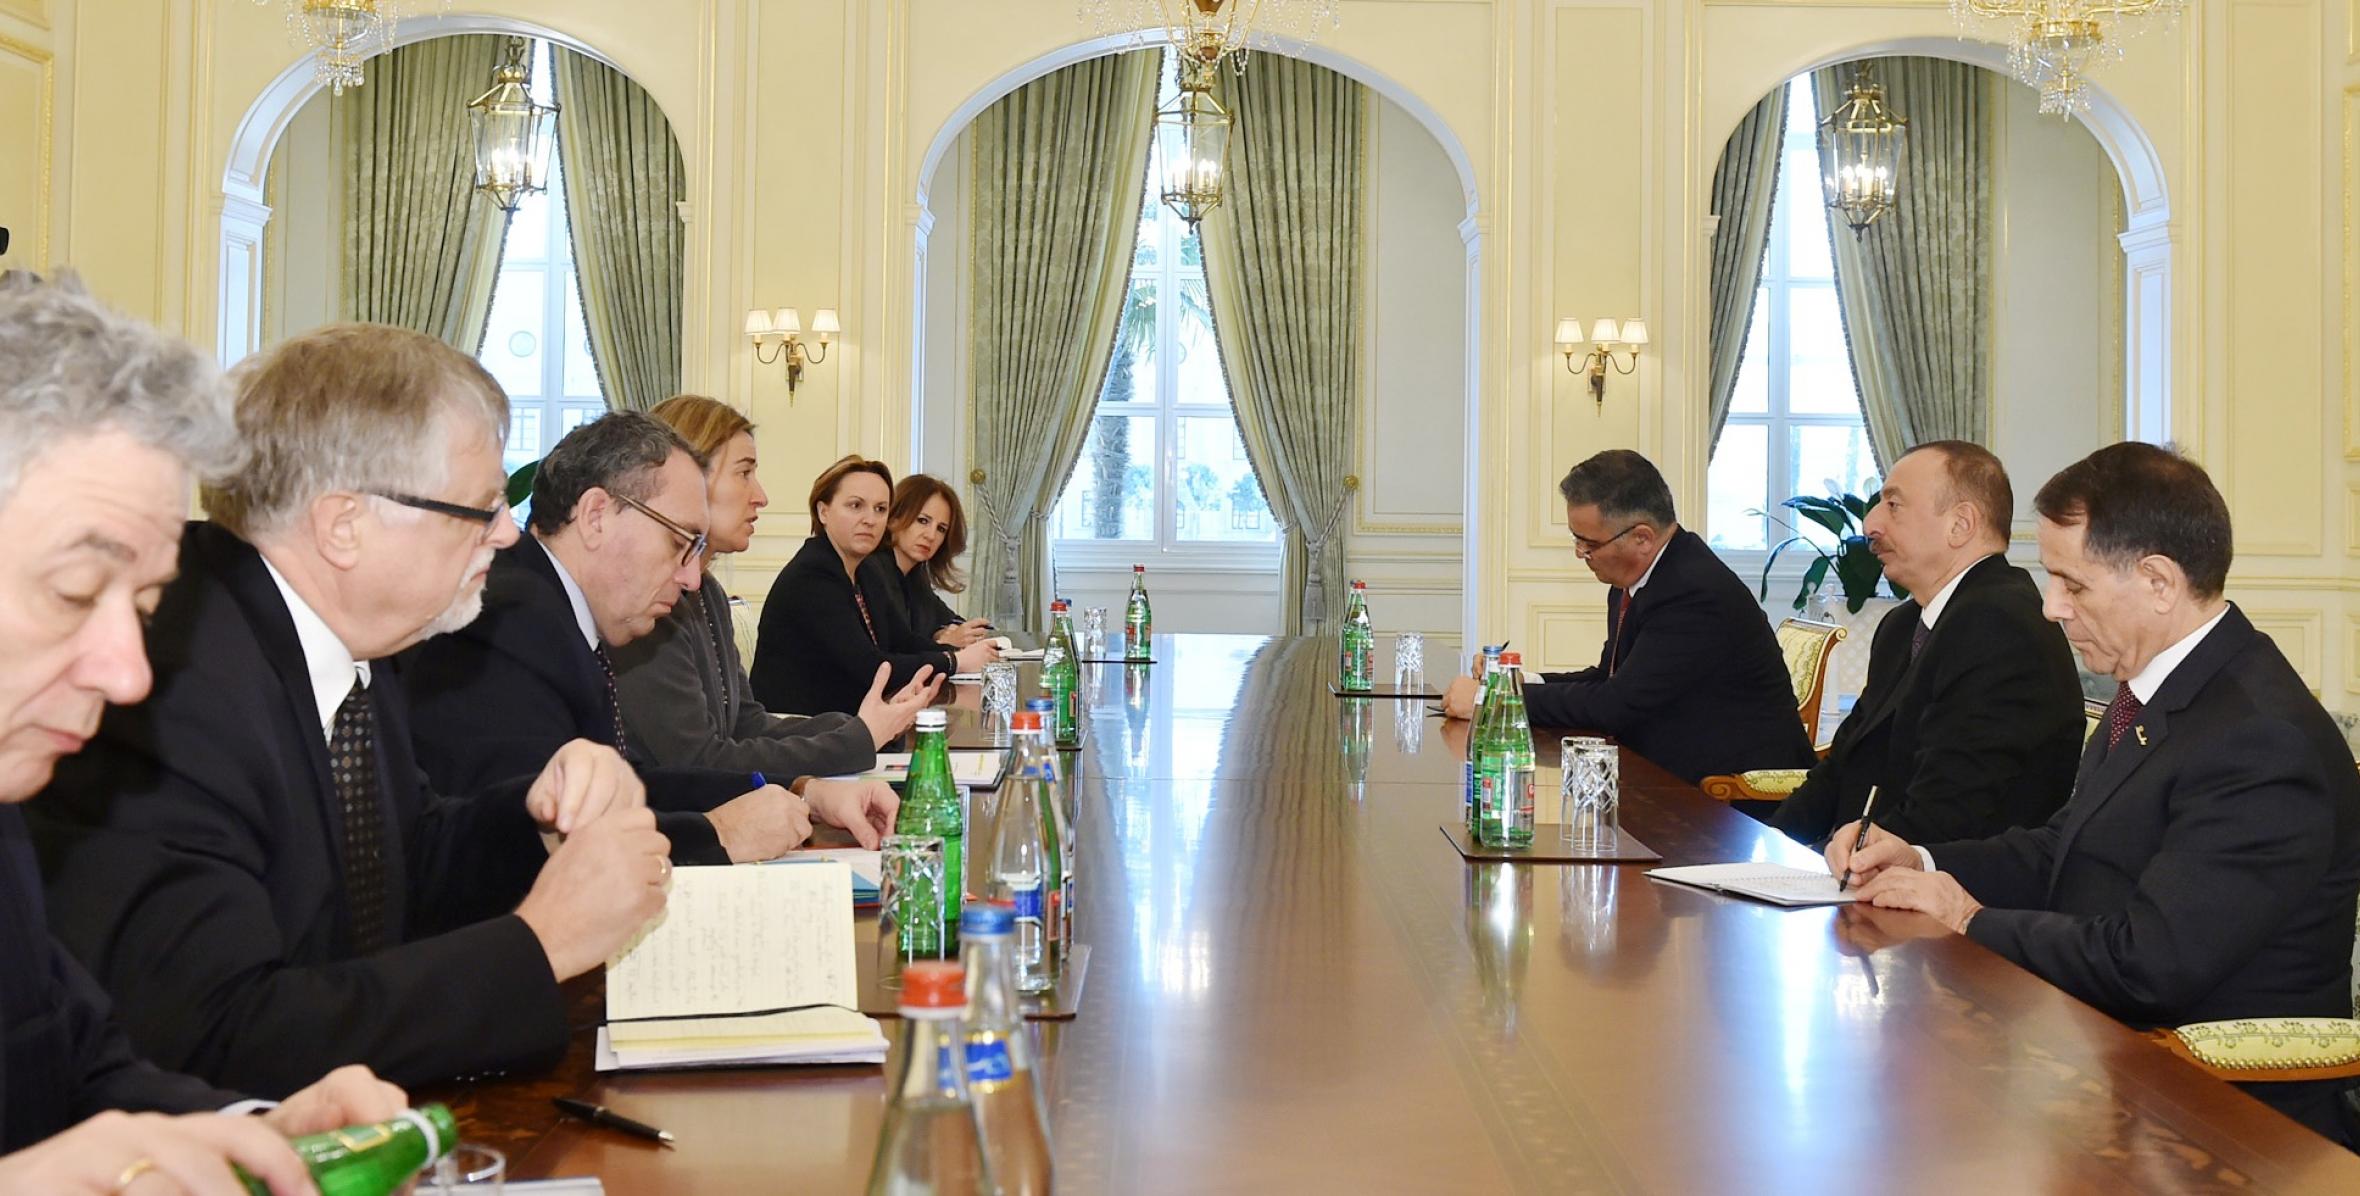 Ilham Aliyev and EU High Representative held an expanded meeting